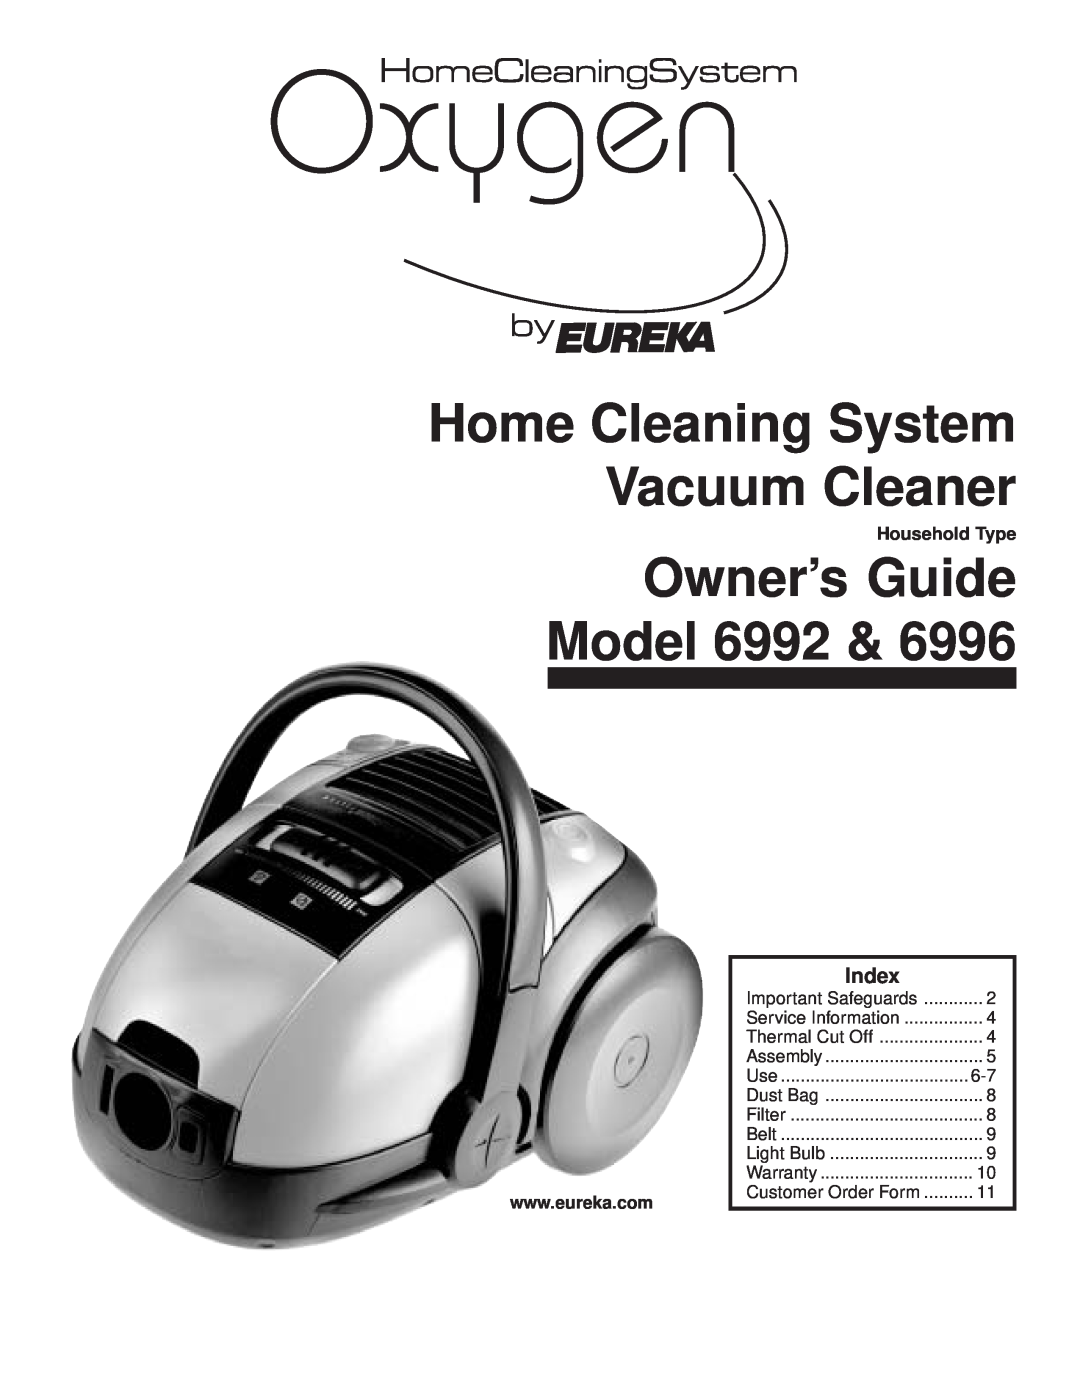 Eureka warranty Index, Household Type, Home Cleaning System Vacuum Cleaner, Owner’s Guide Model 6992, Thermal Cut Off 